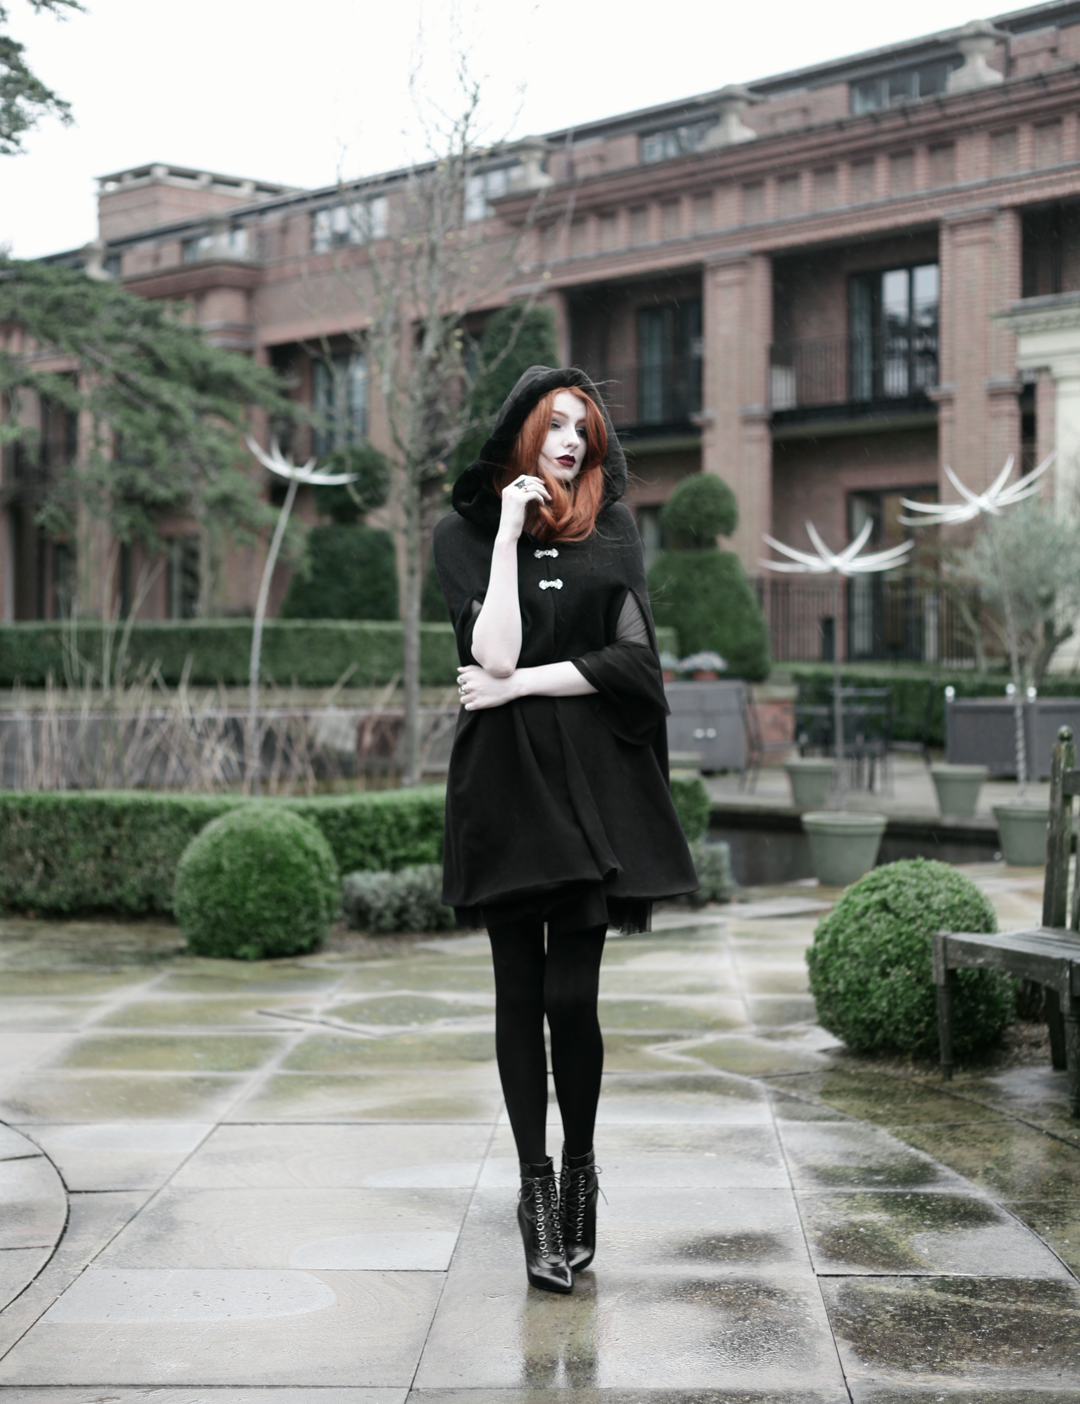 Olivia Emily wears Dark Thorn Clothing Cape, Killstar Nu Decay Dress, and Saint Laurent Fetish Ankle Boots